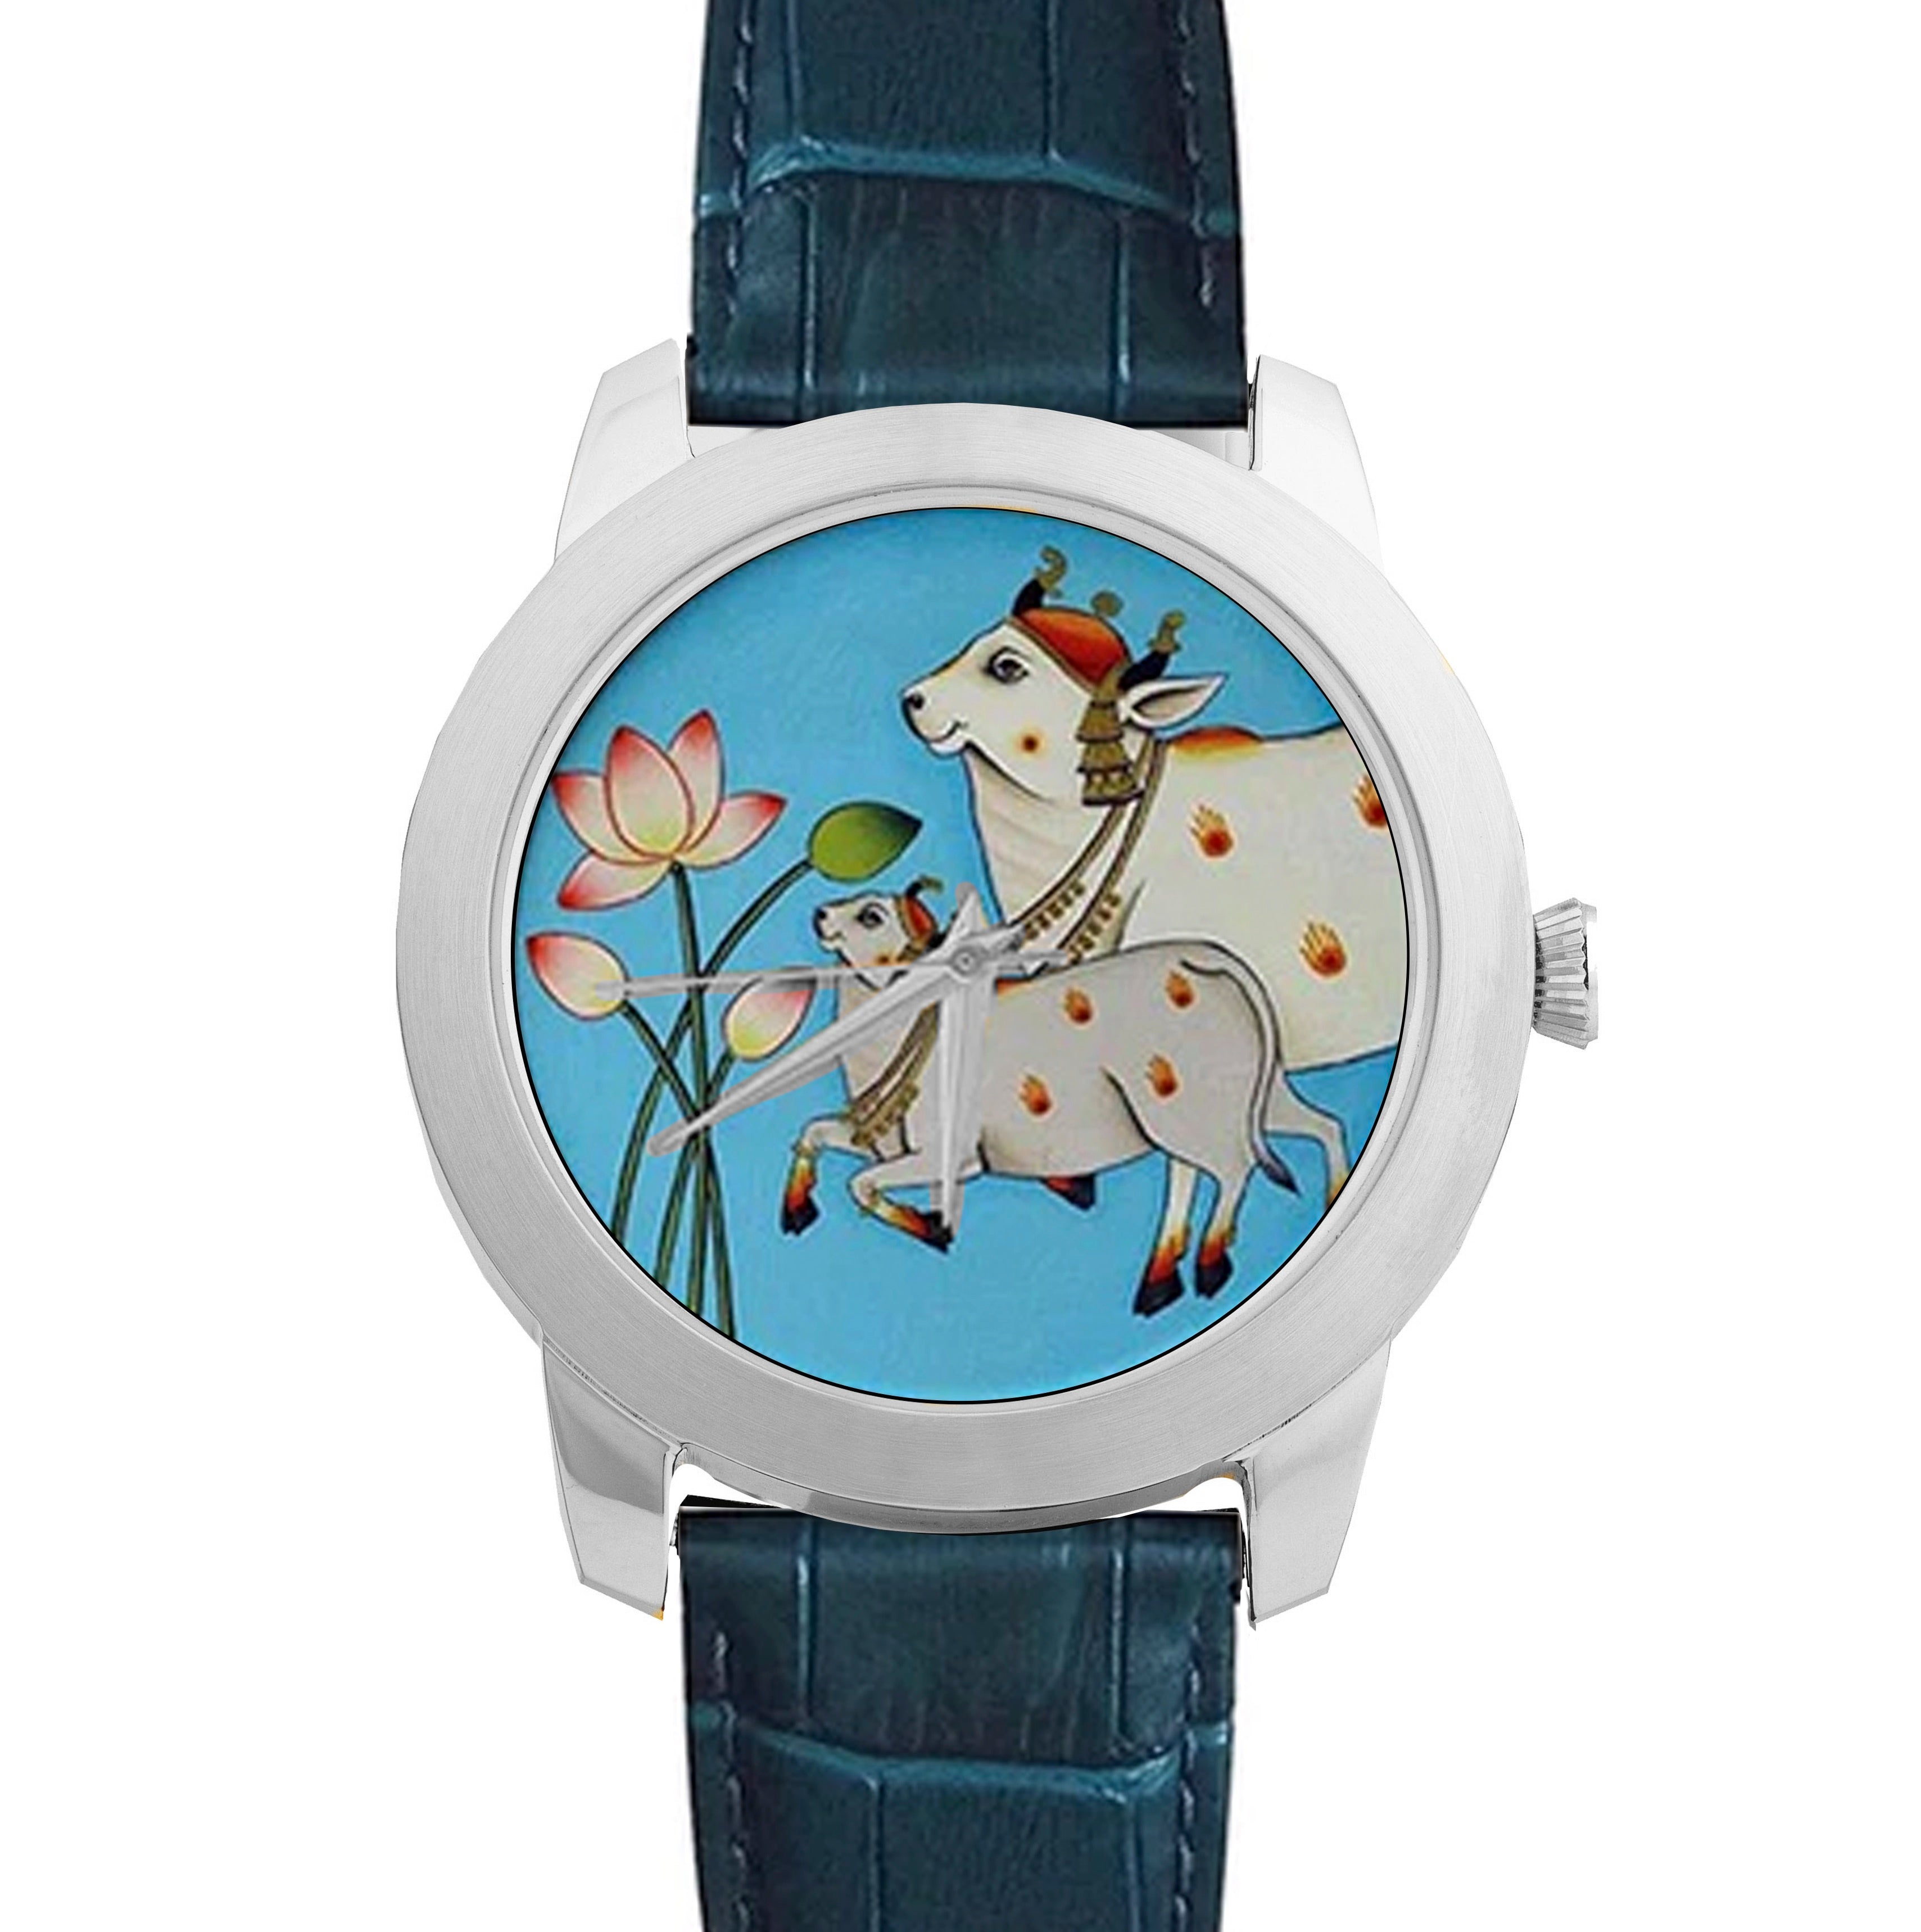 swatch Cow and Boy | Swatch watch, Swatch, Chronograph watch